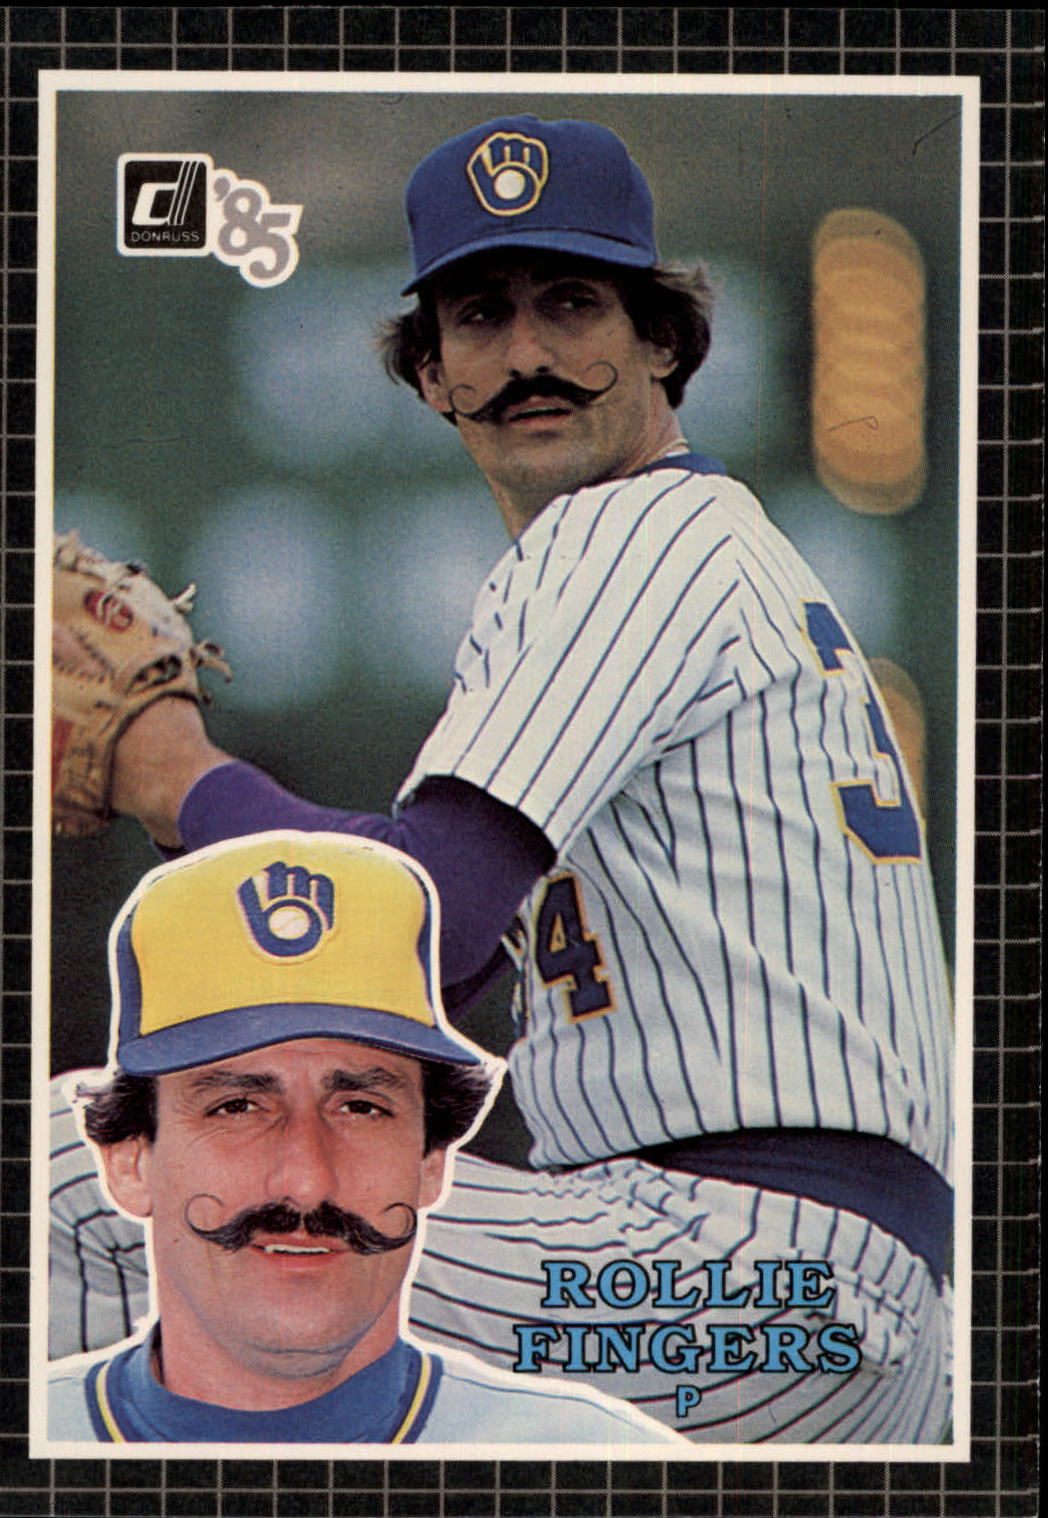 1985 Donruss Action All-Stars #36 Rollie Fingers - . Oversized. - NM-MT